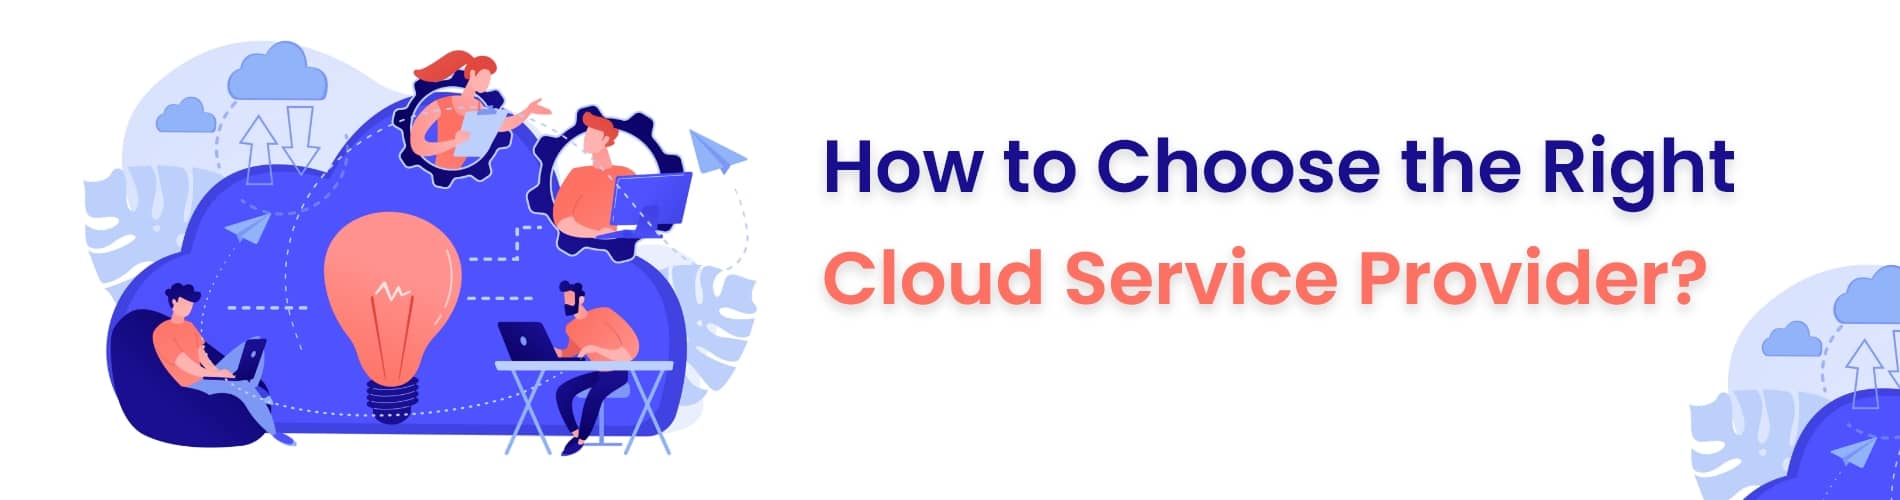 How to select right cloud service provider